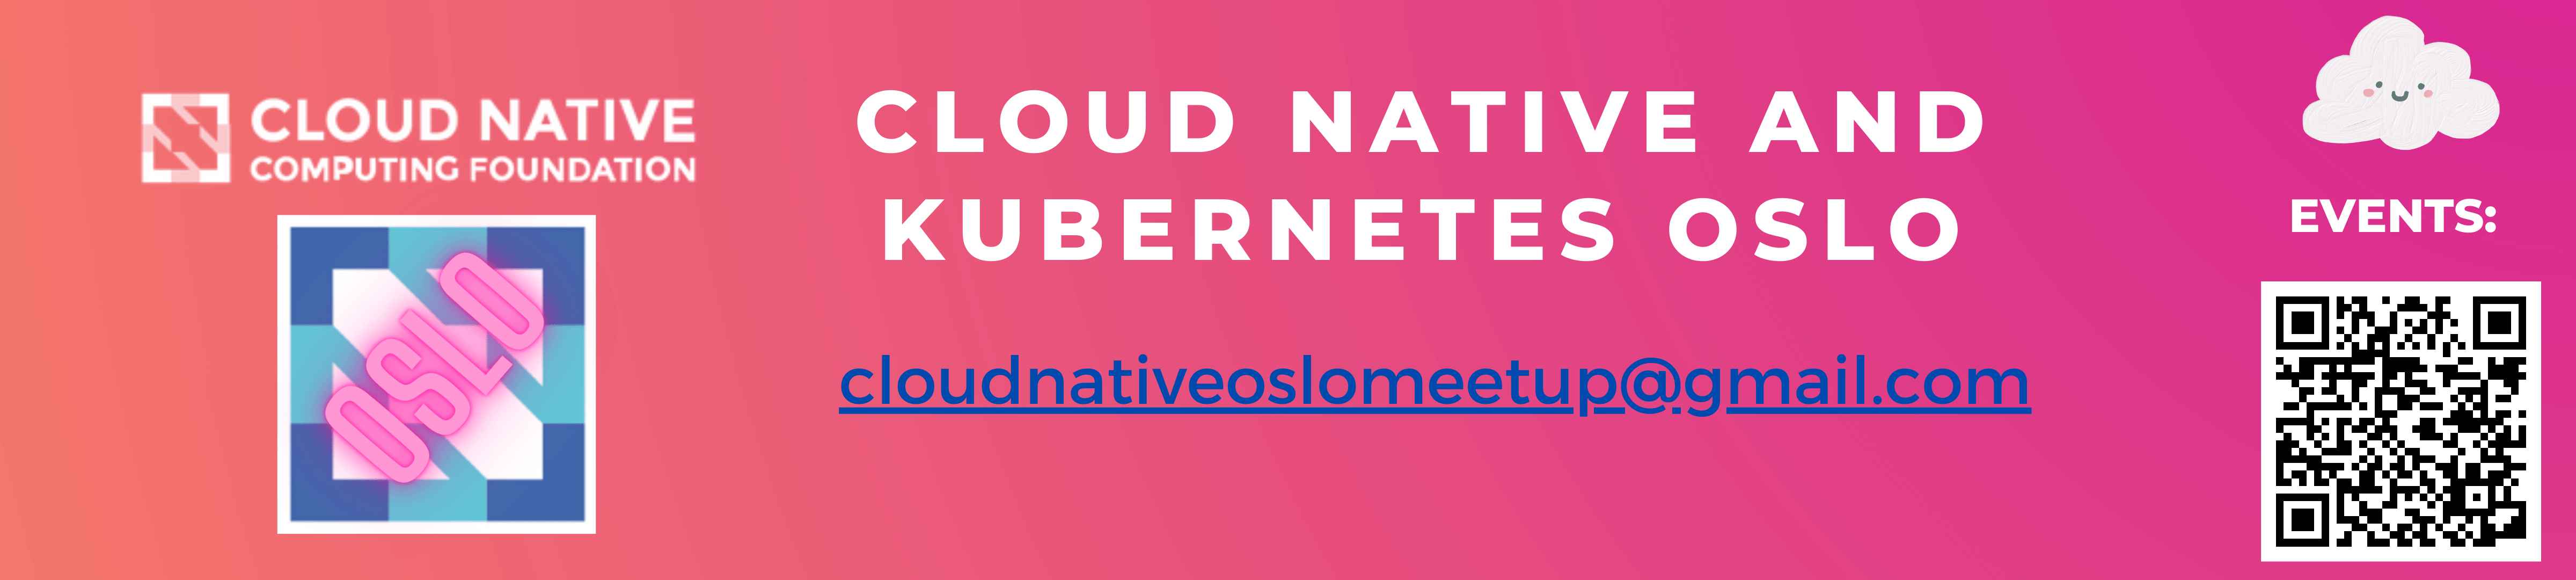 Cloud Native and Kubernetes Oslo banner